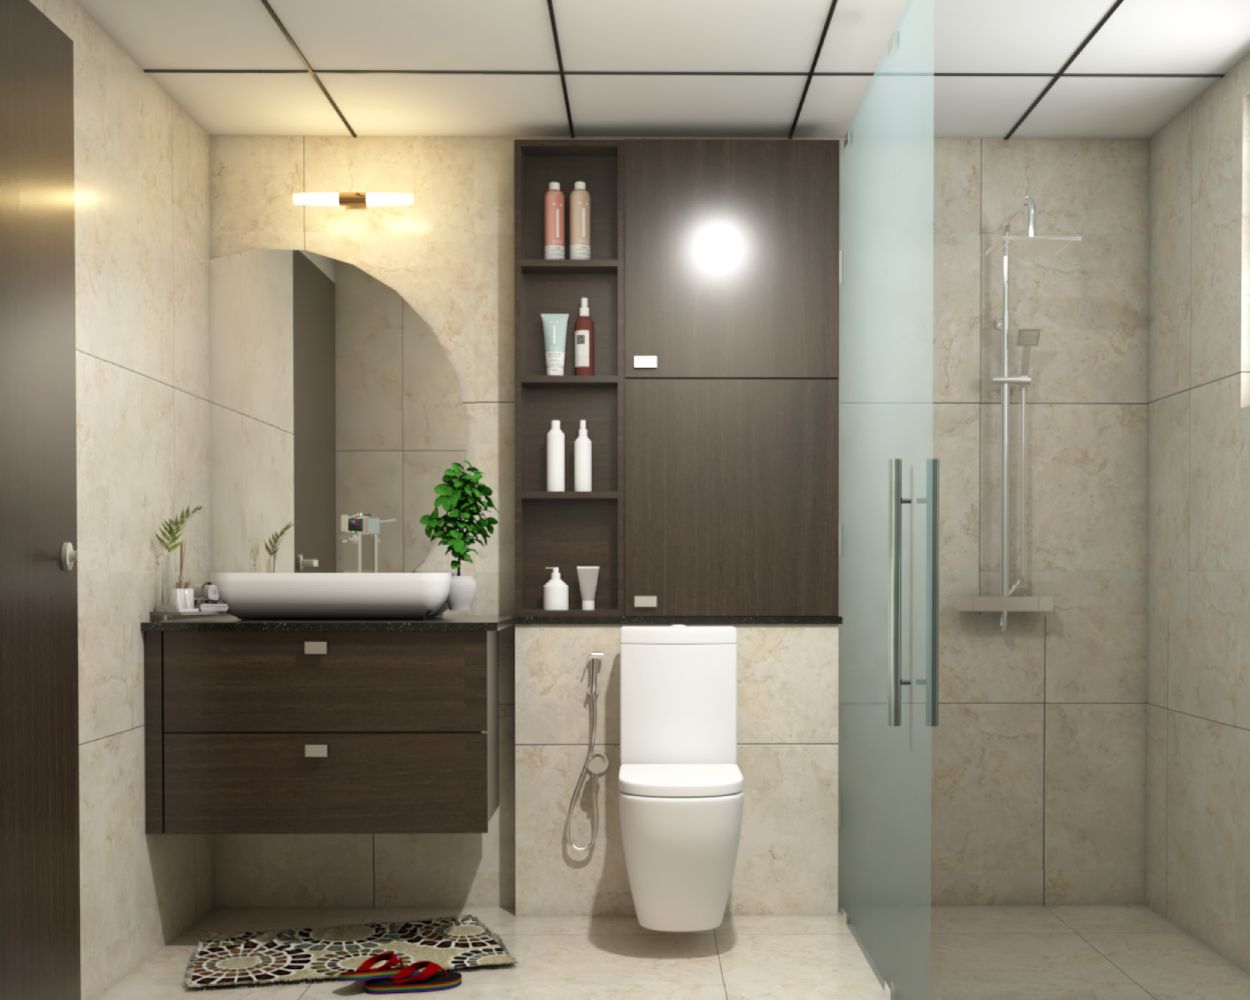 Contemporary Bathroom Design With Beige Wall Tiles And Dark Wood Bathroom Cabinet